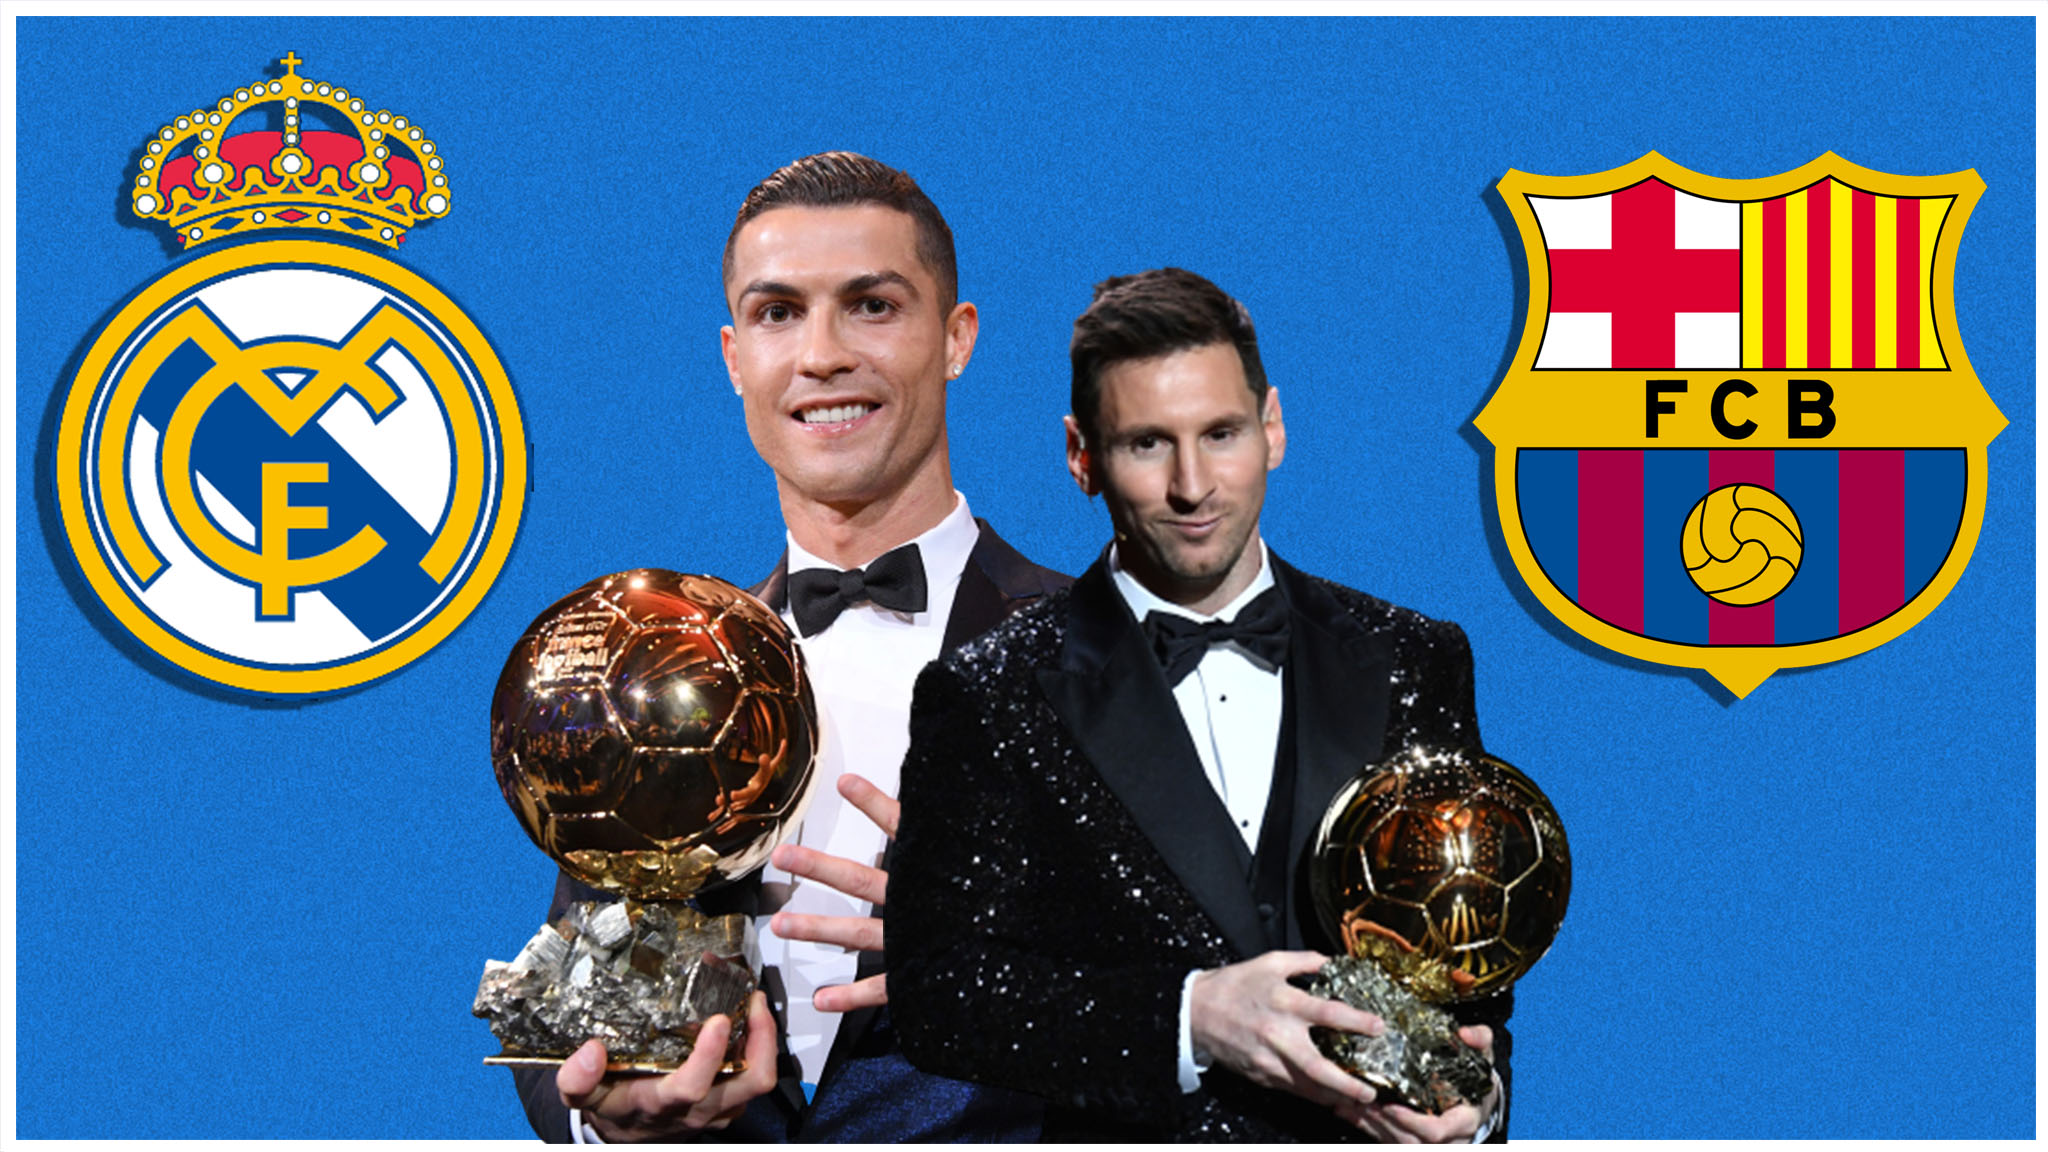 Who has won the Ballon d’Or the most times?